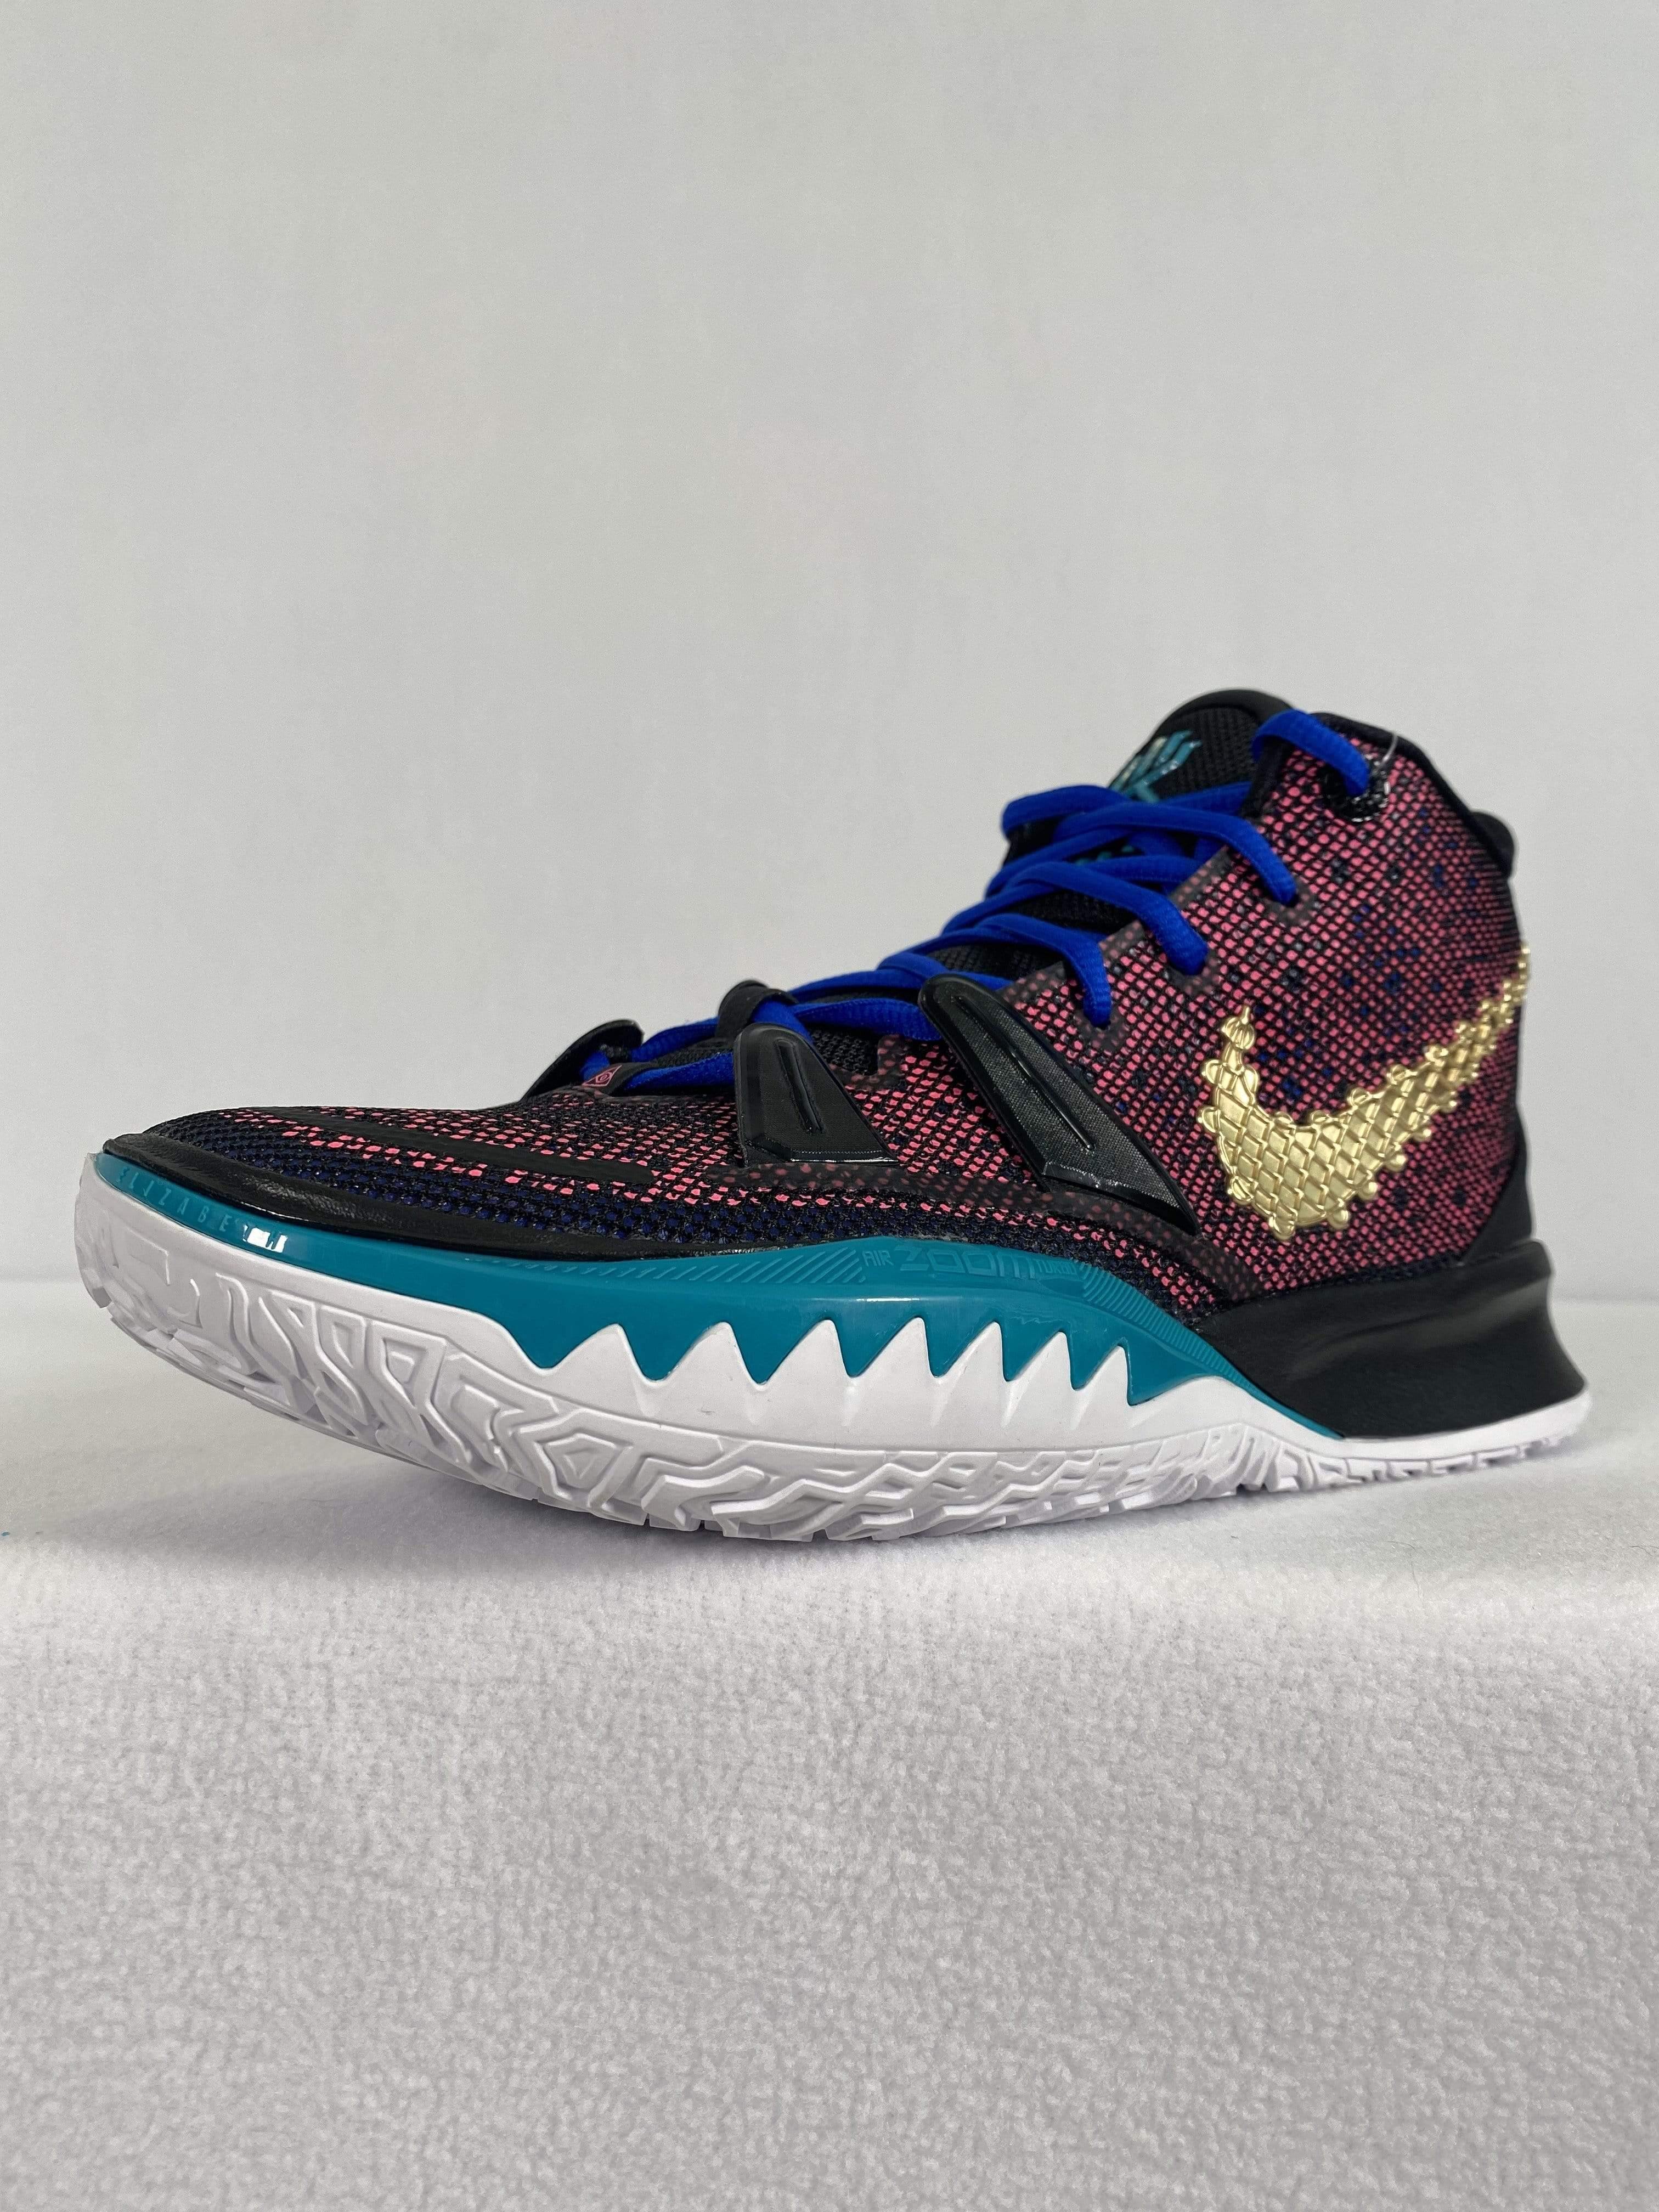 kyrie shoes chinese new year